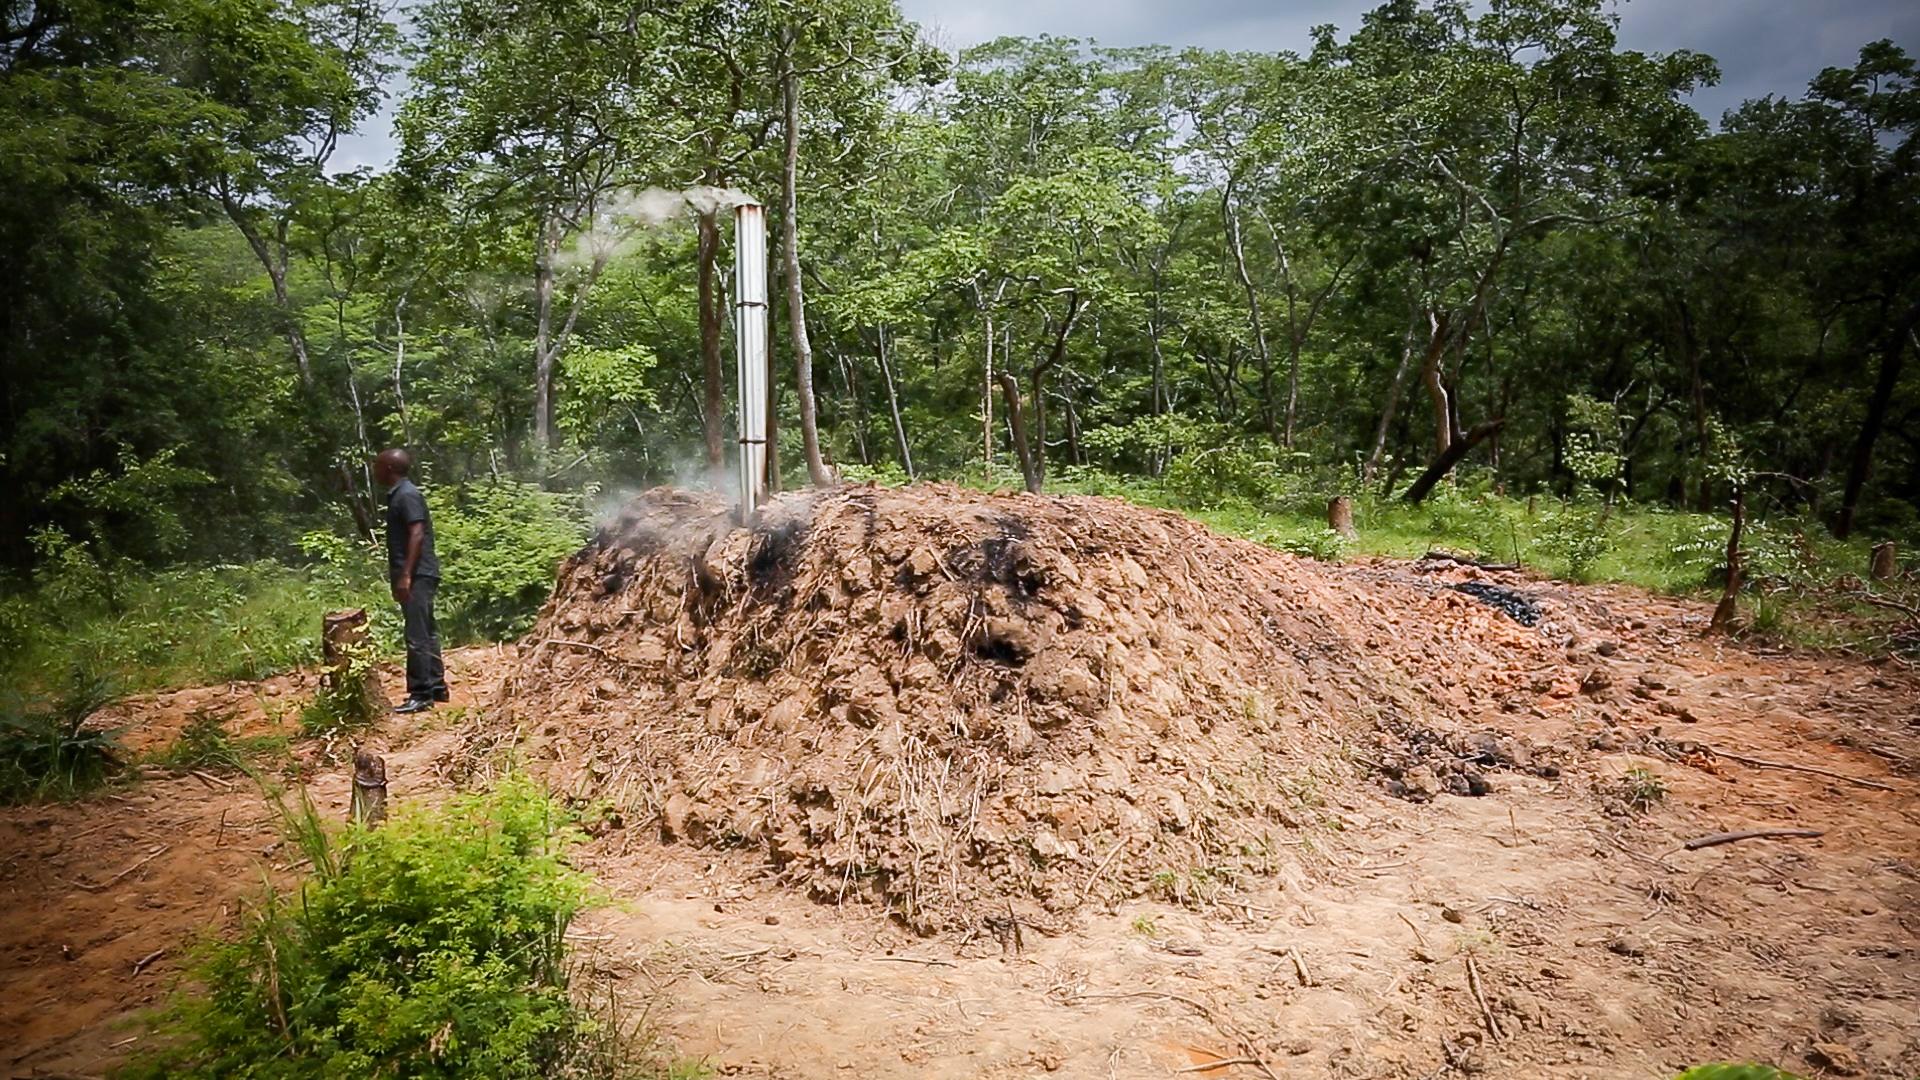 : Sustainable charcoal producers in Kilosa use an improved basic earth kiln to produce charcoal more efficiently. The process takes longer—about a week—but the end product is a longer and cleaner burning charcoal.